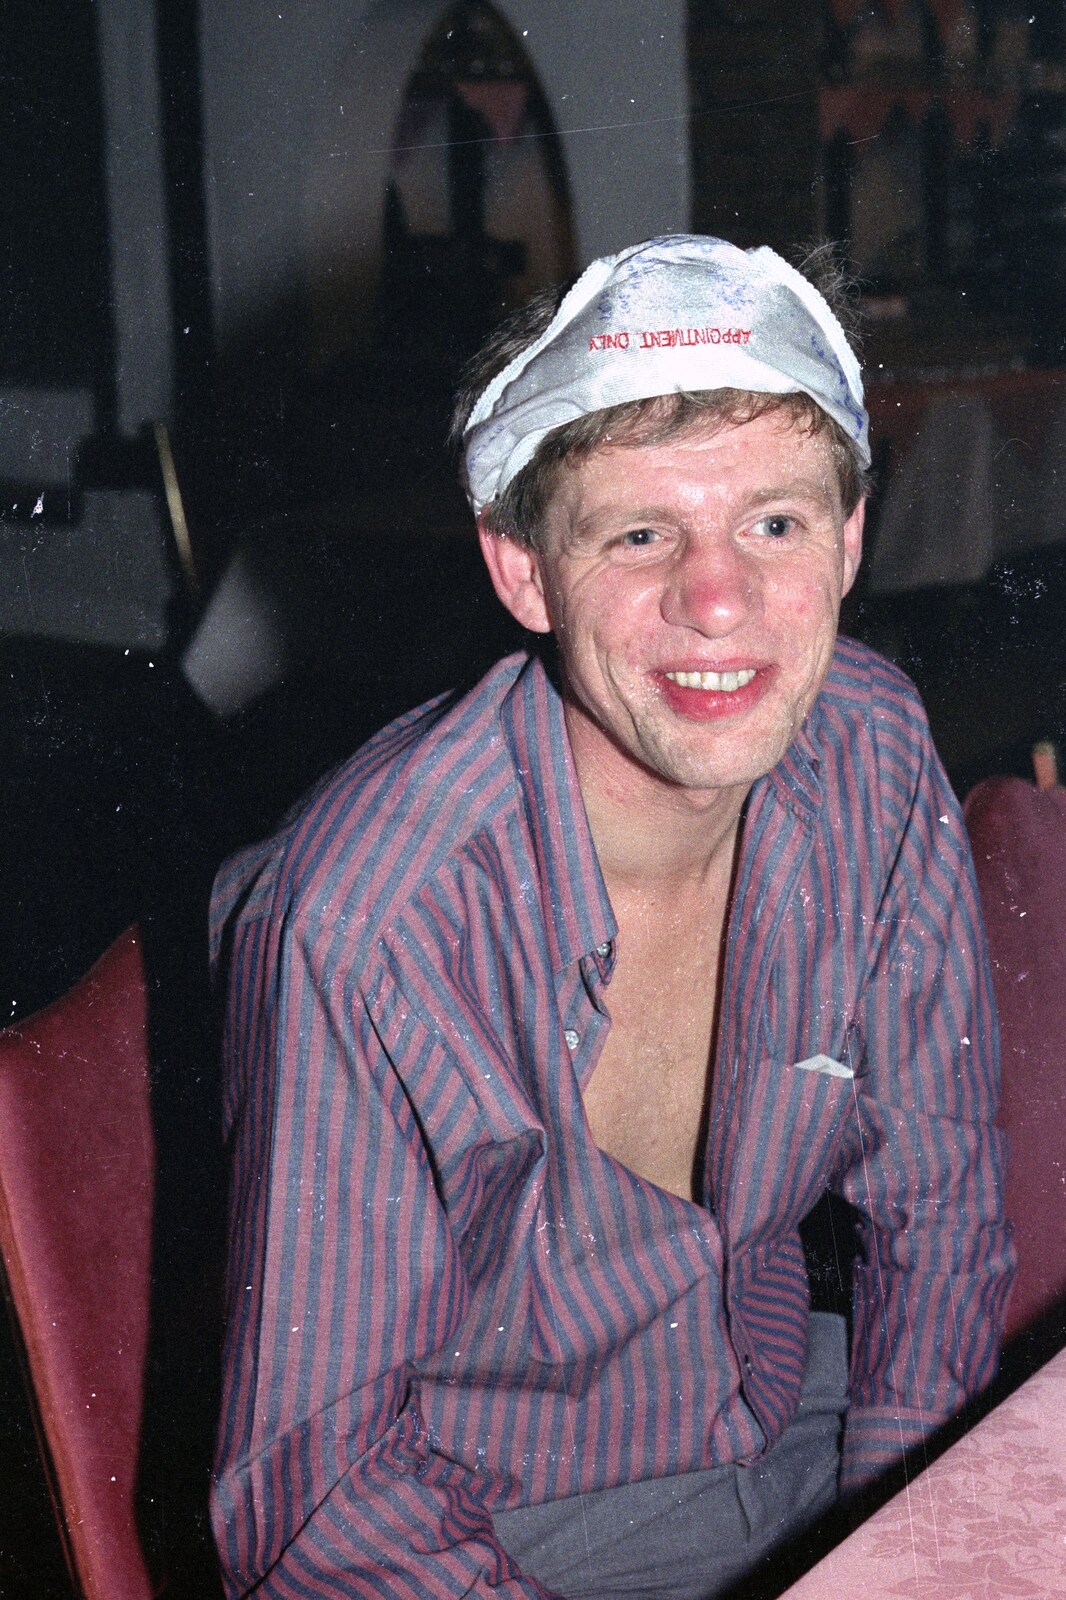 Steve-o has knickers on his head from Printec and Steve-O's Pants, The Swan, Harleston, Norfolk - 19th May 1990